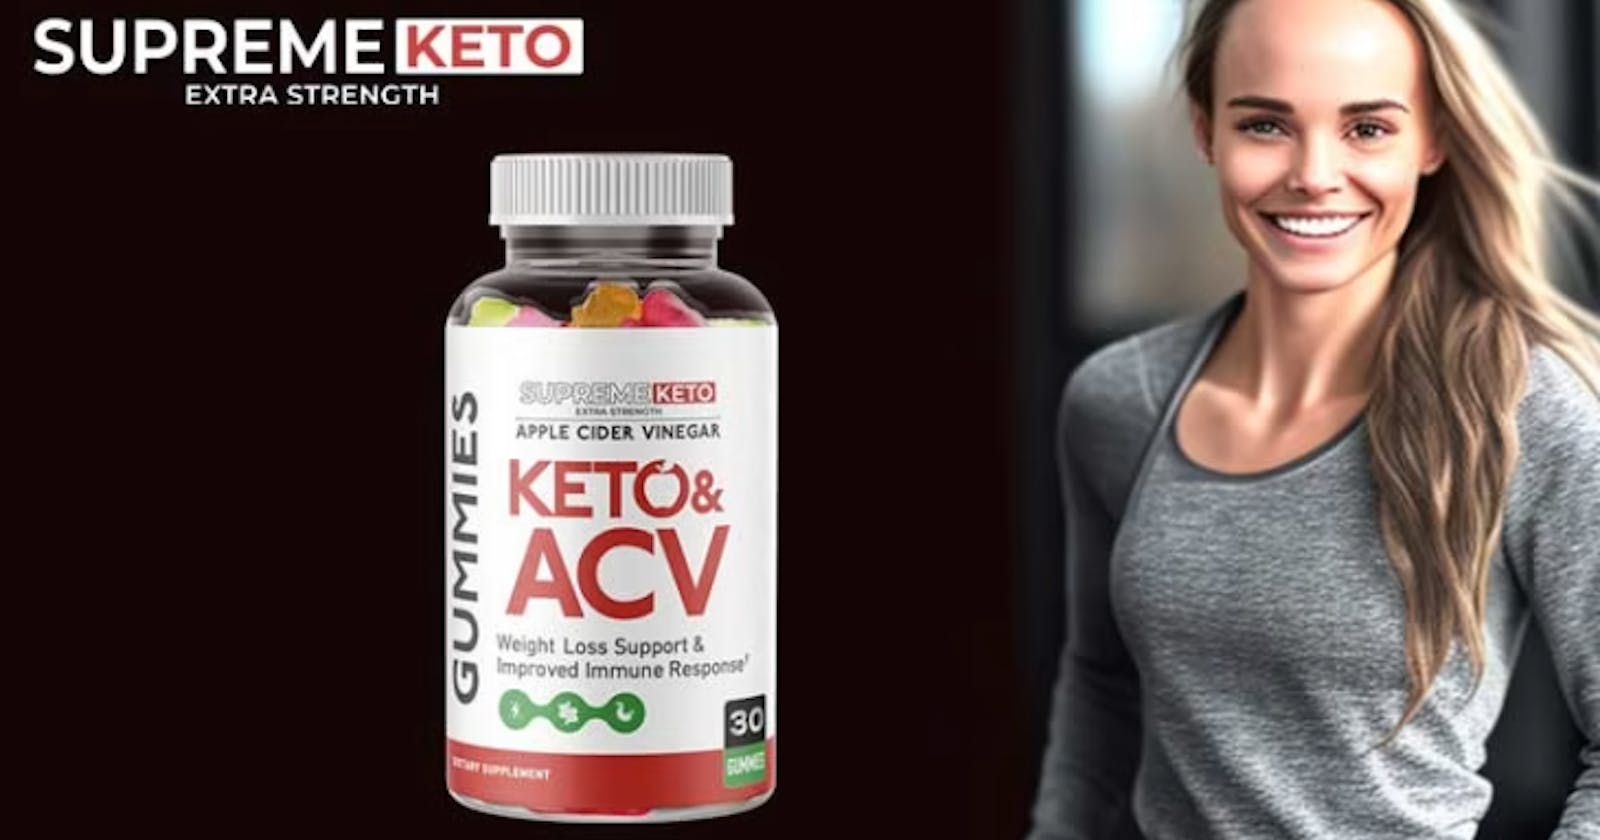 Dr Oz Weight Loss Gummies CA, US - Get True Fat Burning With Keto!